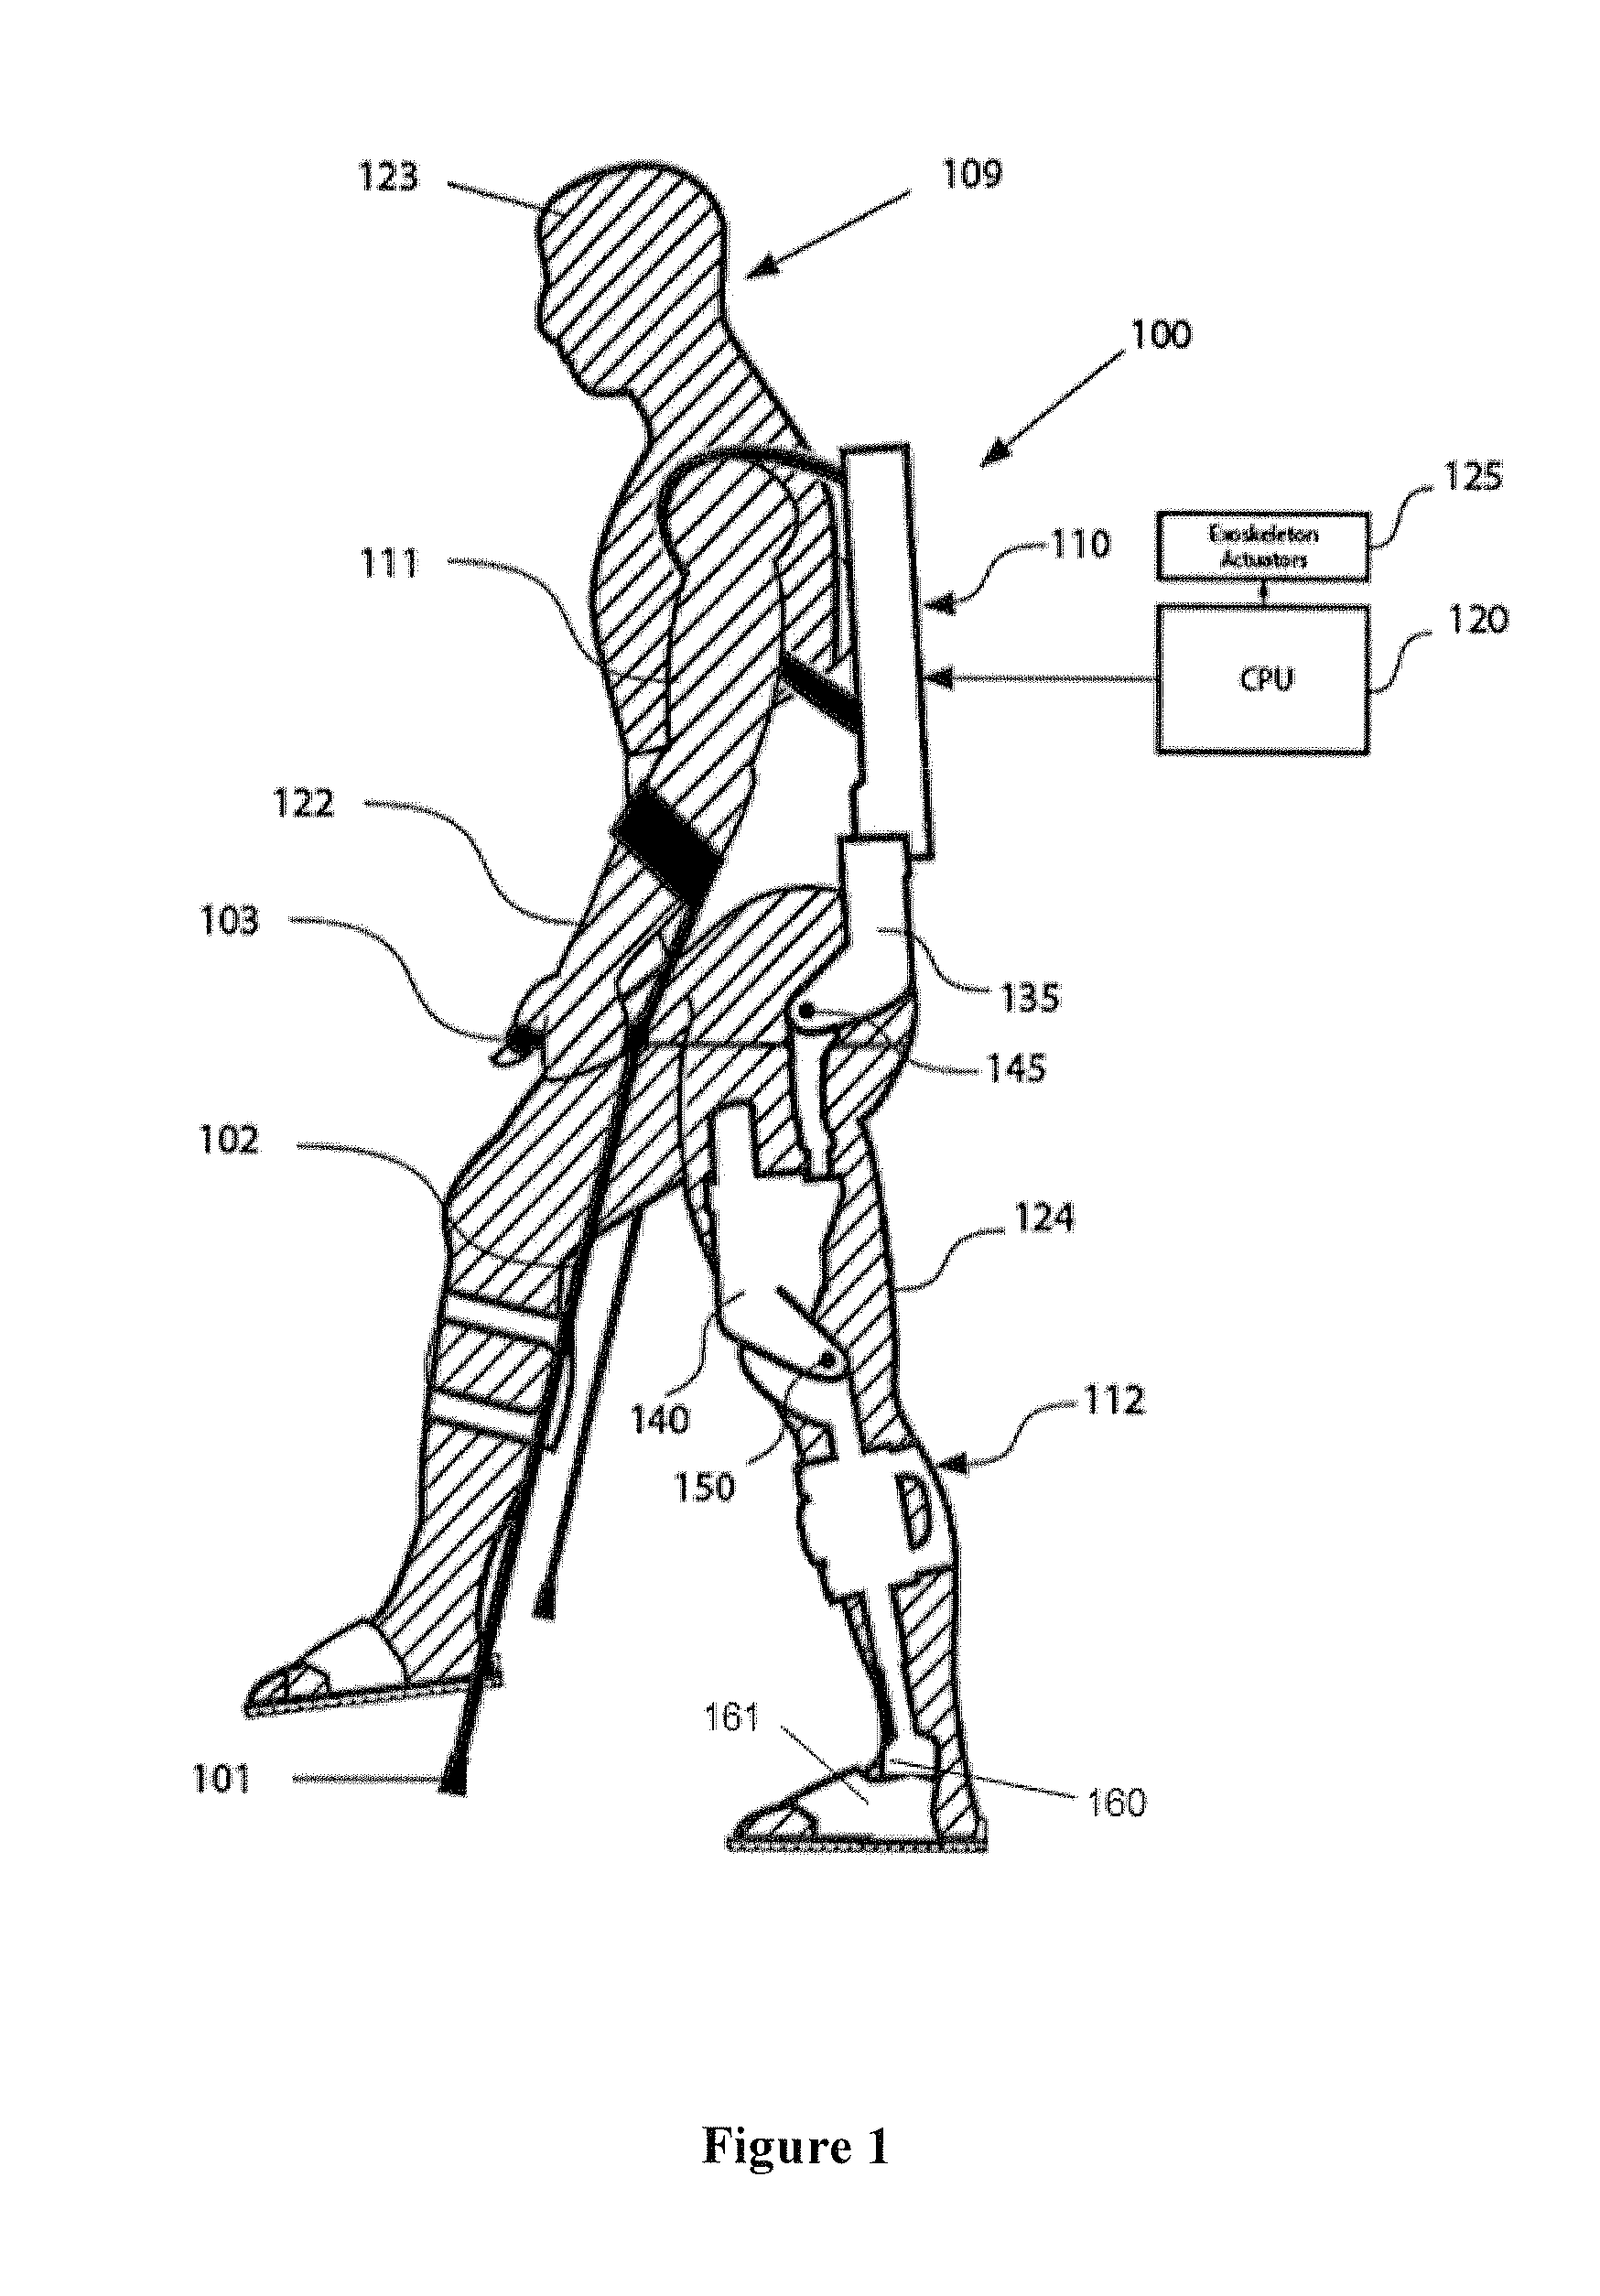 Machine to Human Interfaces for Communication from a  Lower Extremity Orthotic